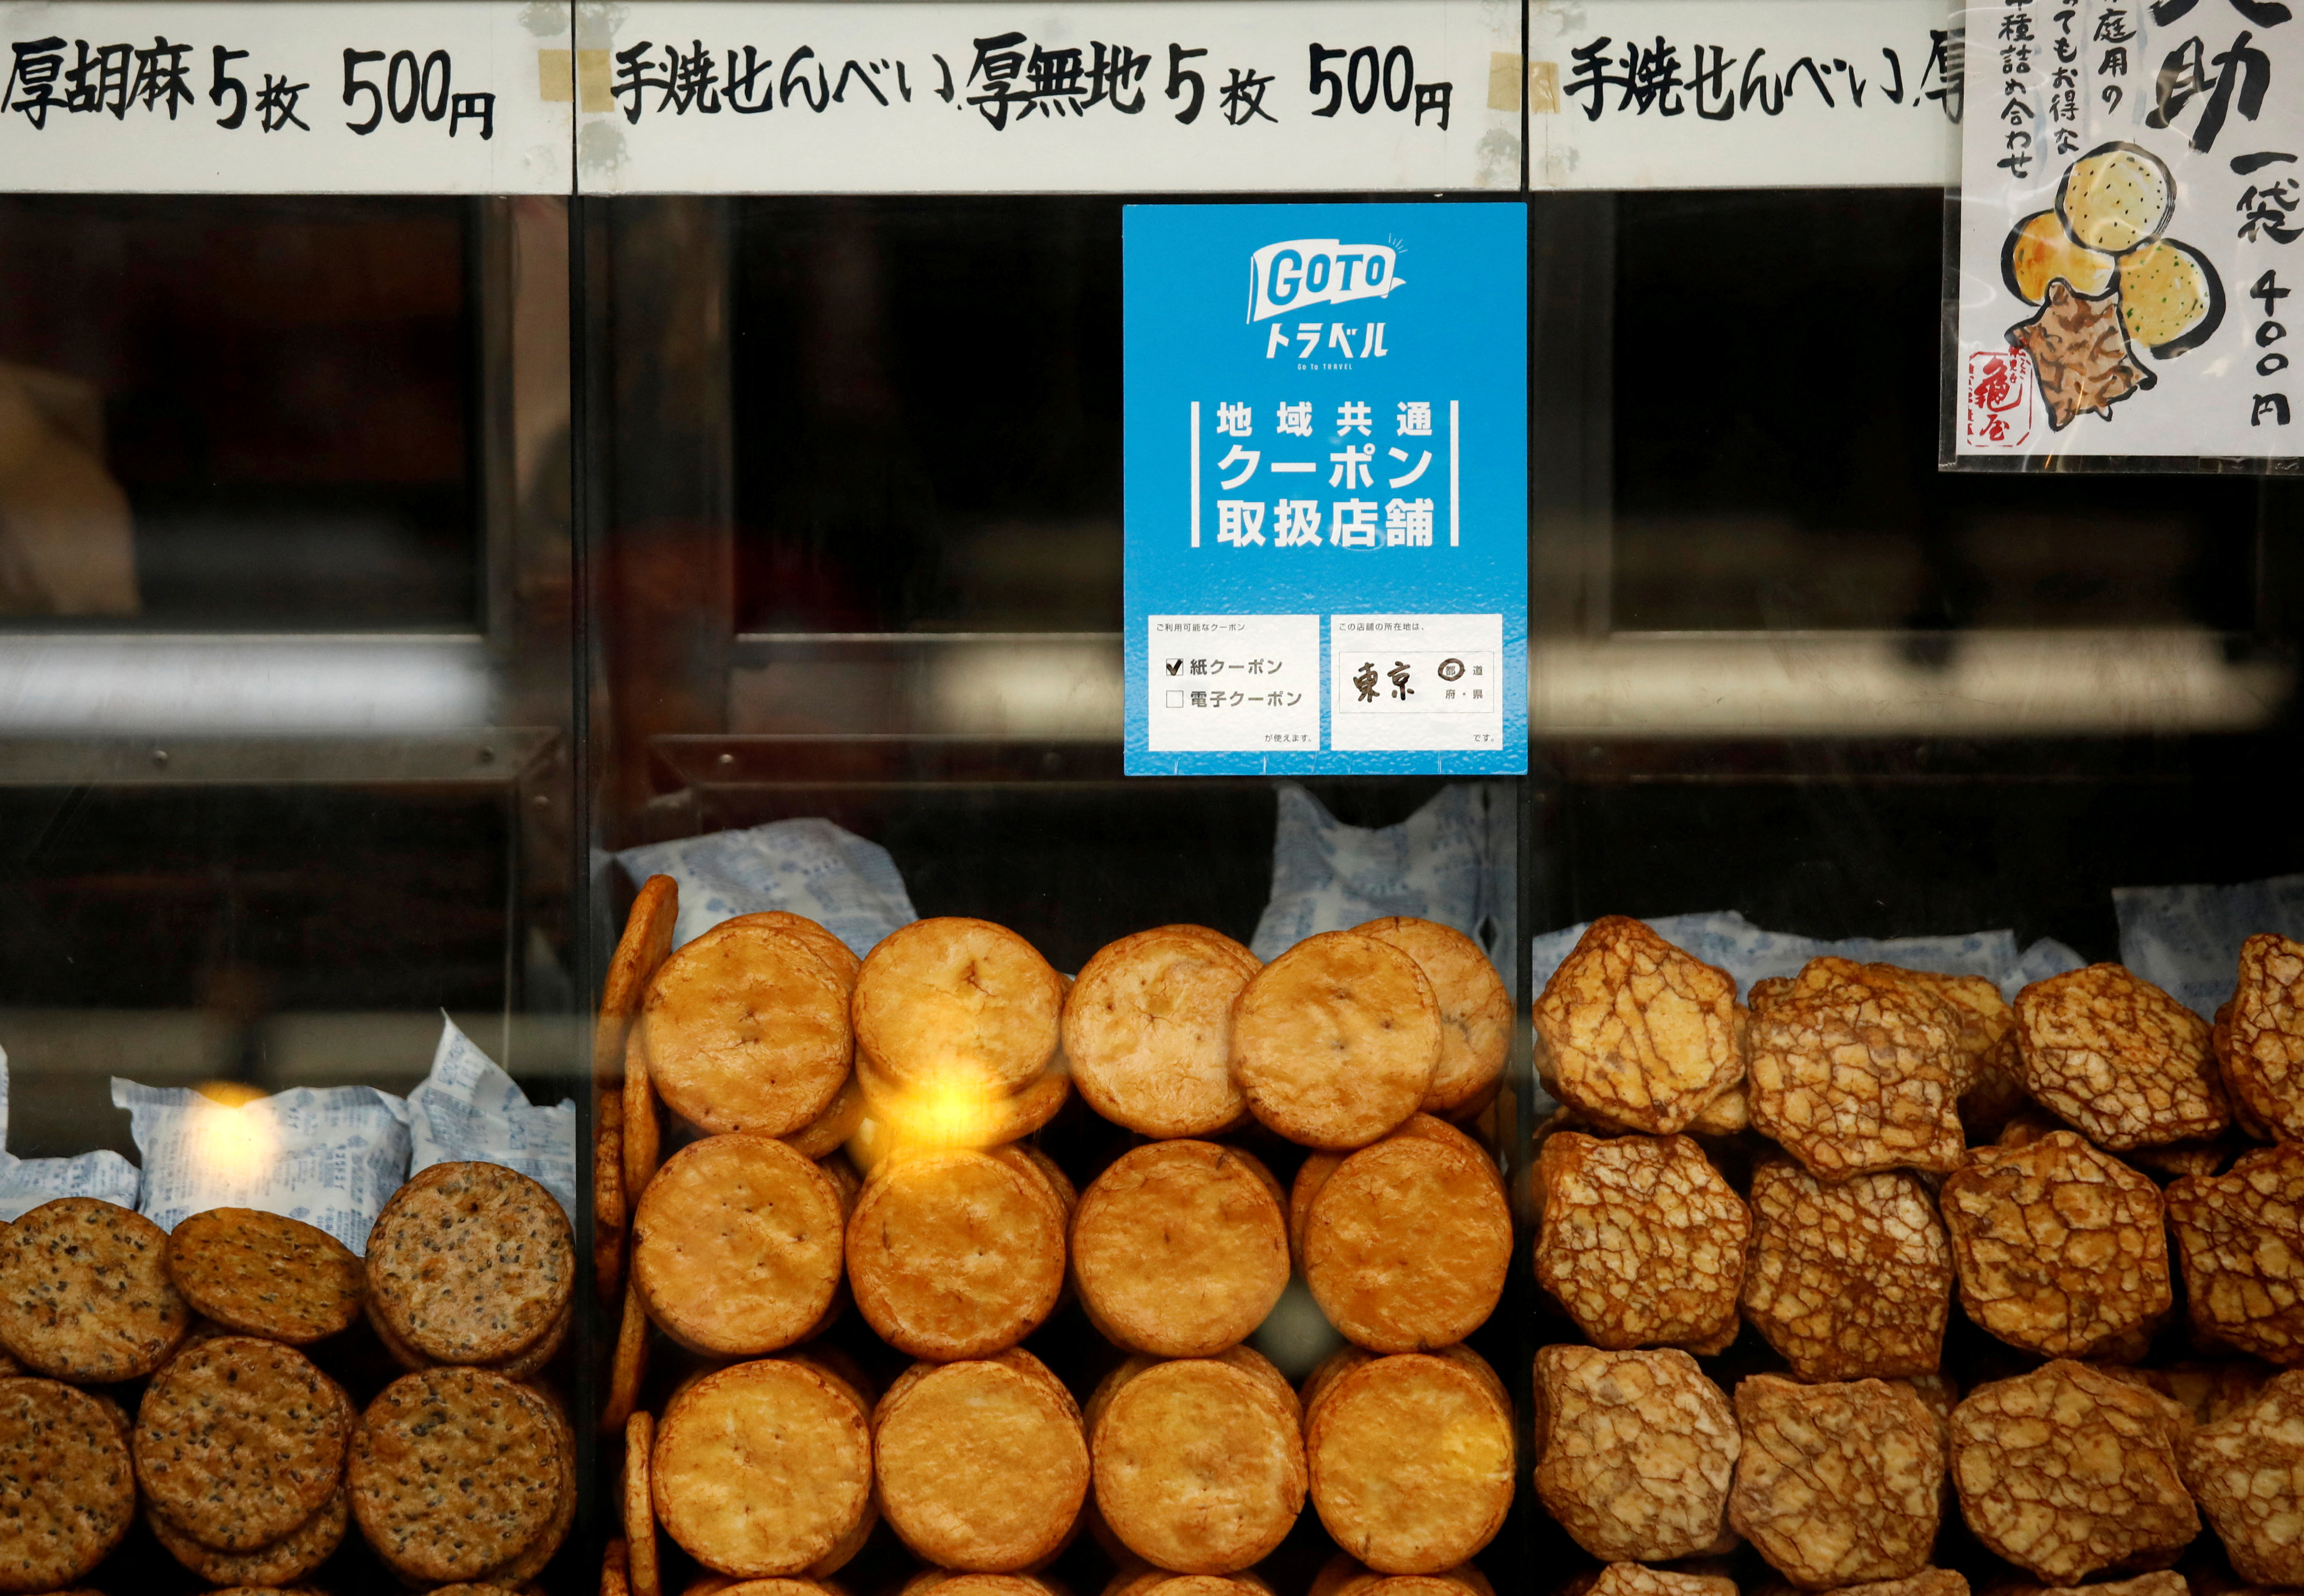 A sign for 'Go To Travel' campaign is displayed at a store at Asakusa district, a popular sightseeing spot, amid the coronavirus disease (COVID-19) outbreak in Tokyo